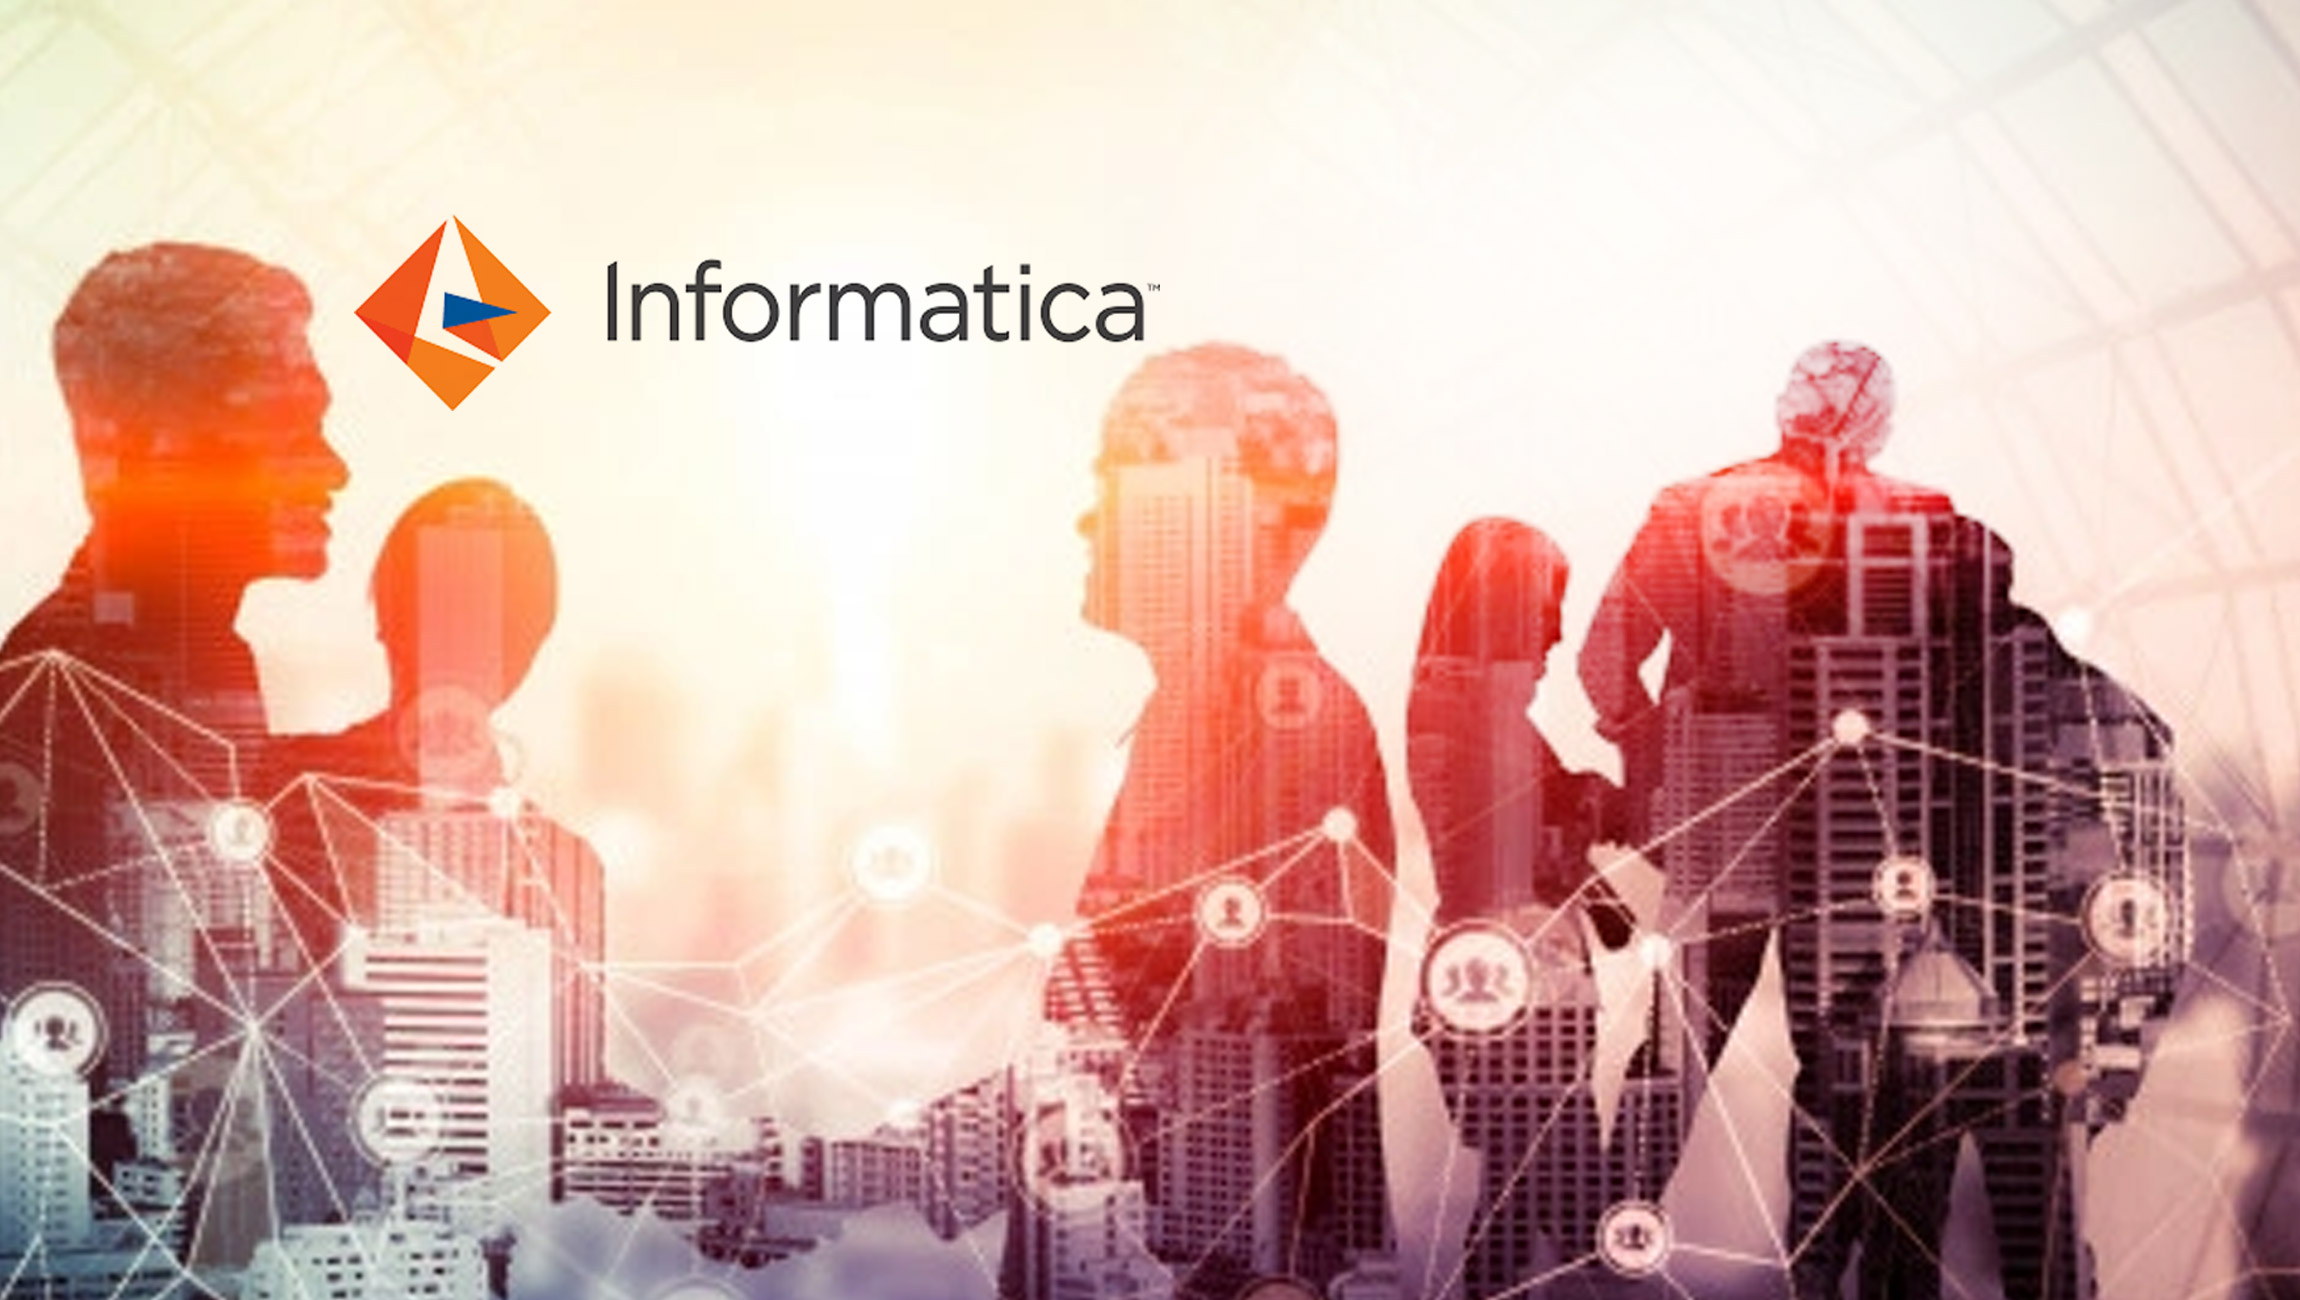 Informatica Receives “Strong” Vendor Rating by Gartner in Product/Services and Support/Account Management in 2022 Vendor Rating Report